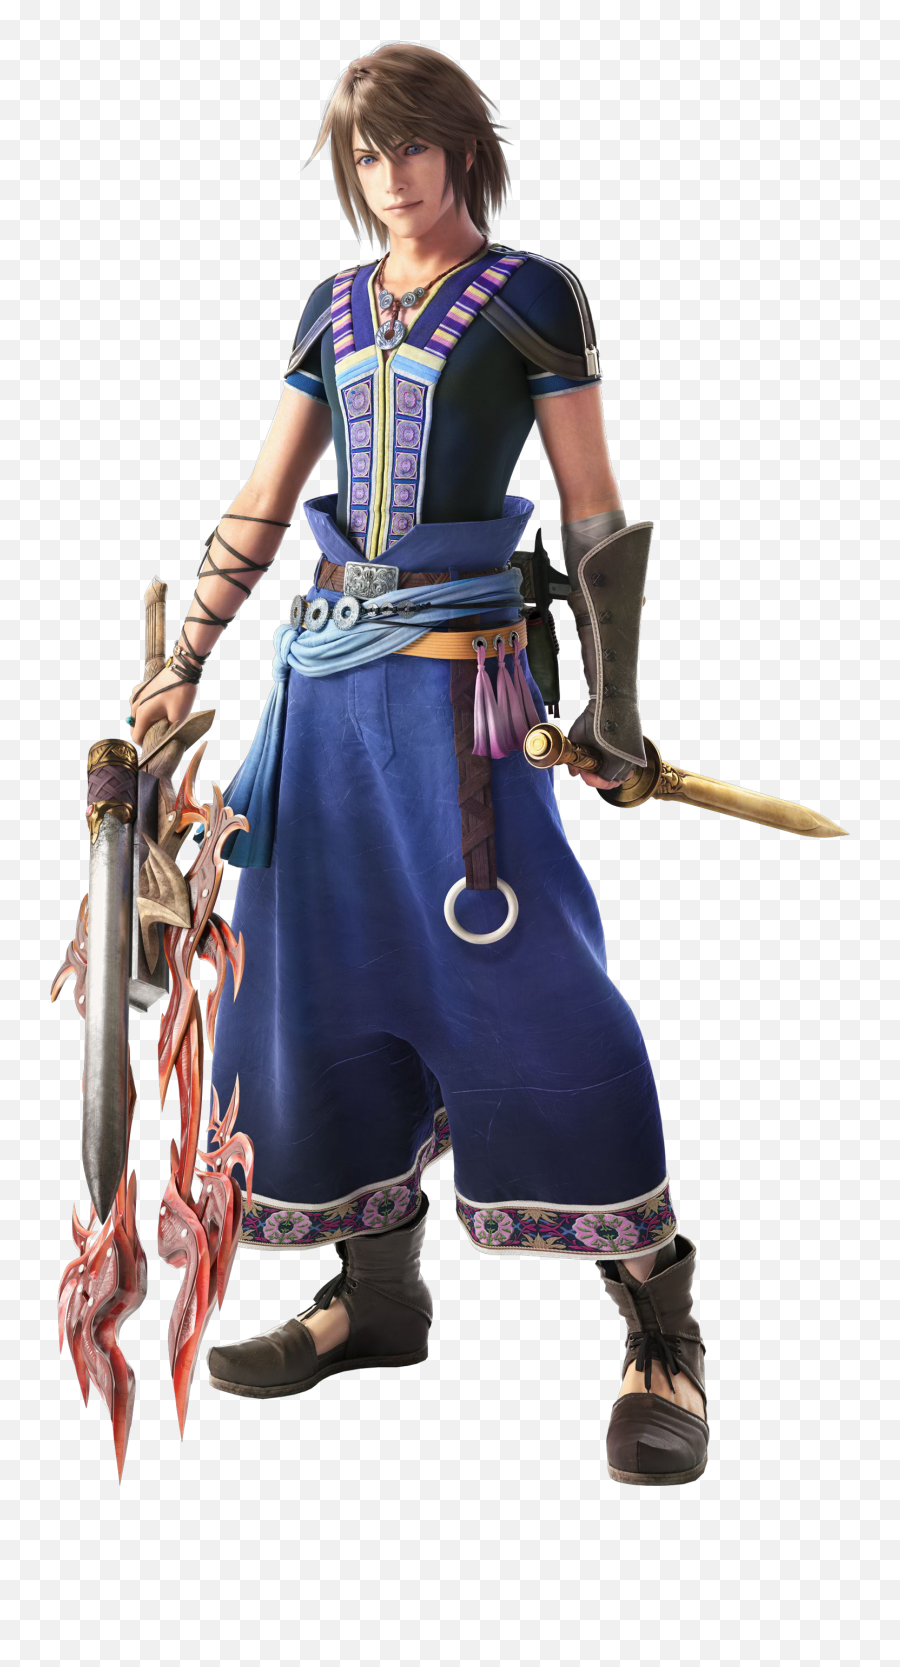 Final Fantasy Xiii 2 Character Renders And High Resolution Final Fantasy 13 2 Characters Png Free Transparent Png Images Pngaaa Com